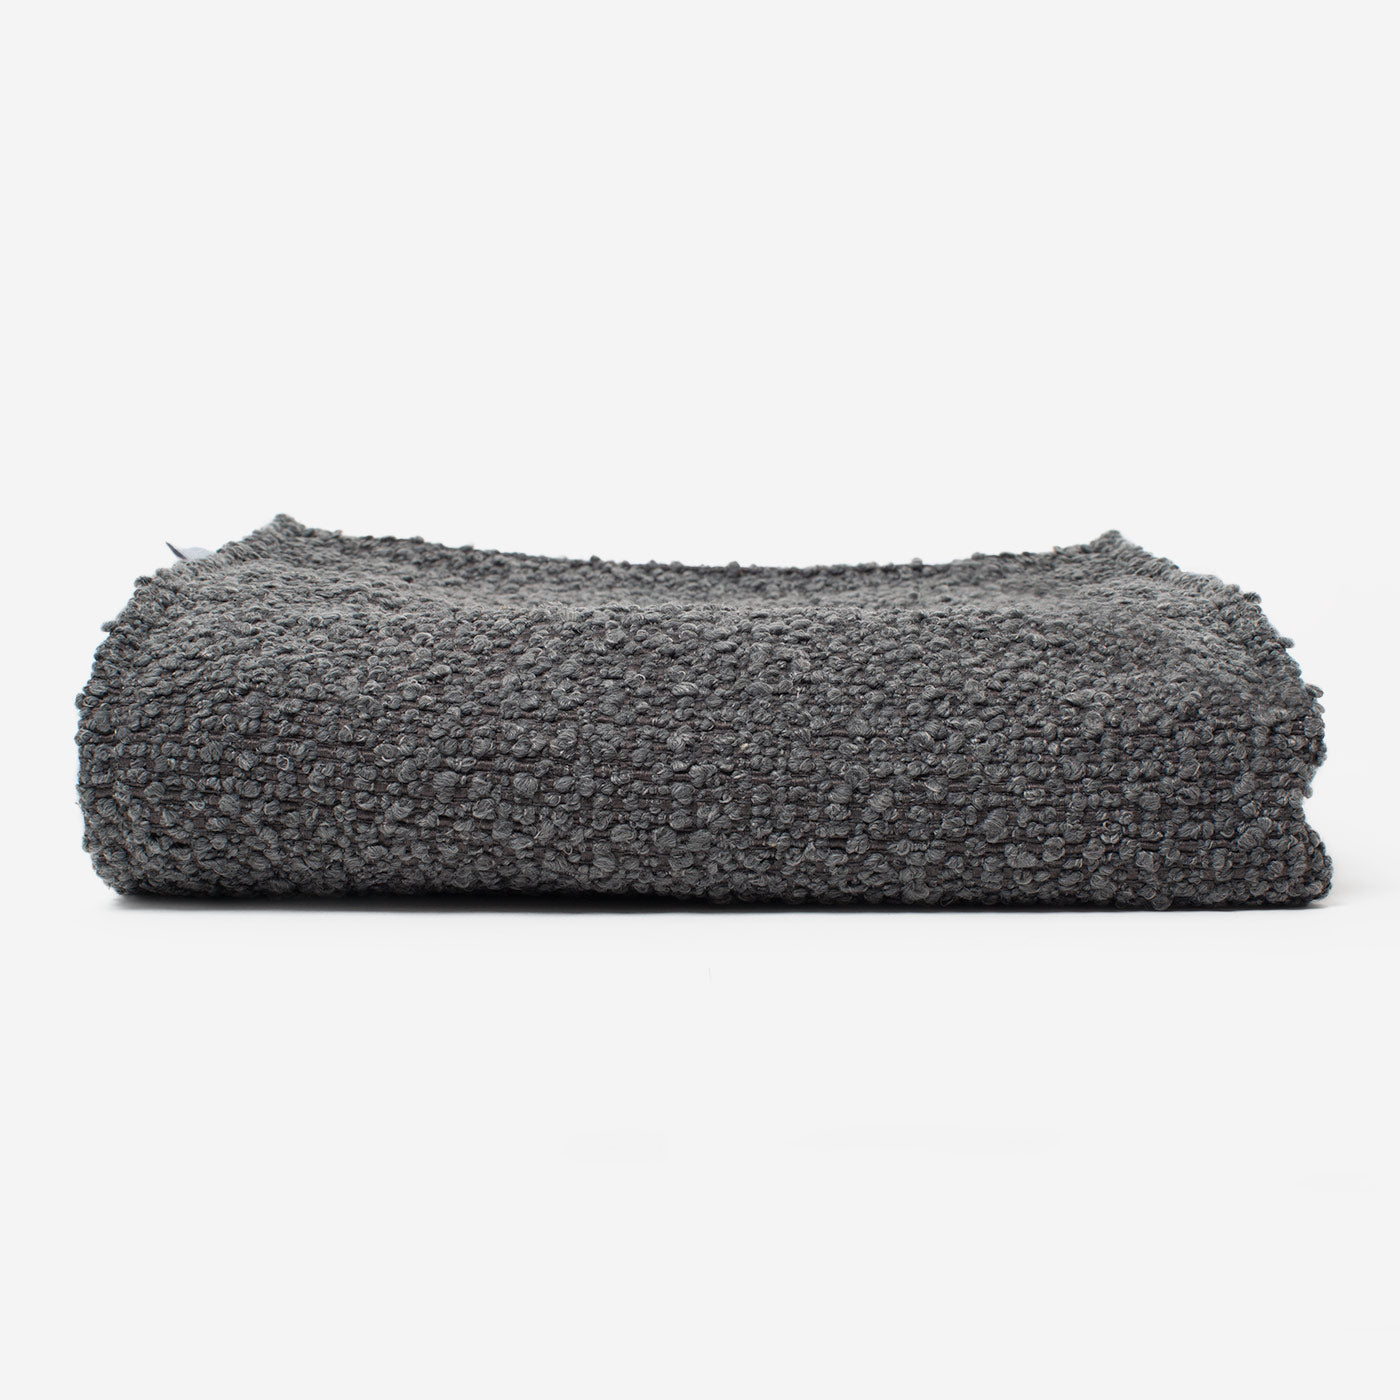 [colour:Granite Boucle] Super Soft Sherpa & Teddy Fleece Lining, Our Luxury Cat & Kitten Blanket In Stunning Granite Boucle I The Perfect Cat Bed Accessory! Available Now at Lords & Labradors